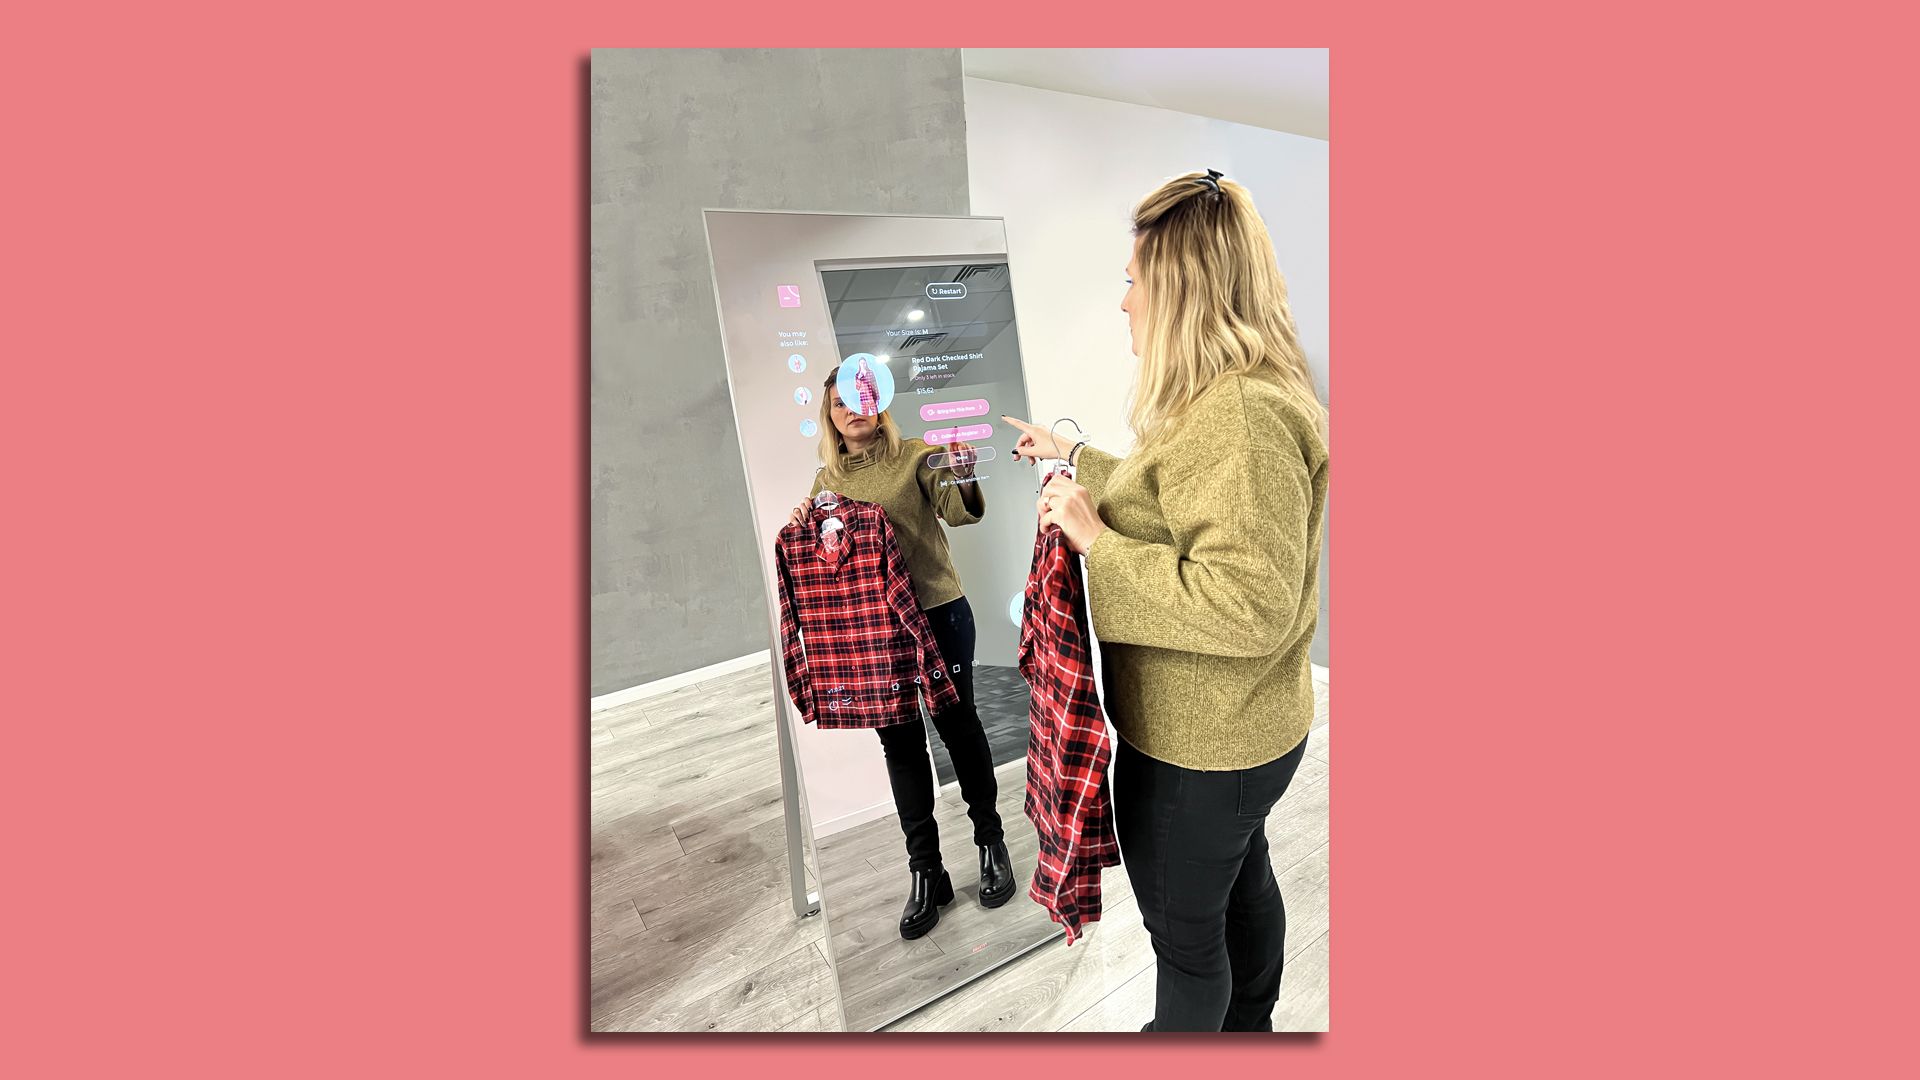 A woman standing in front of a "smart" mirror